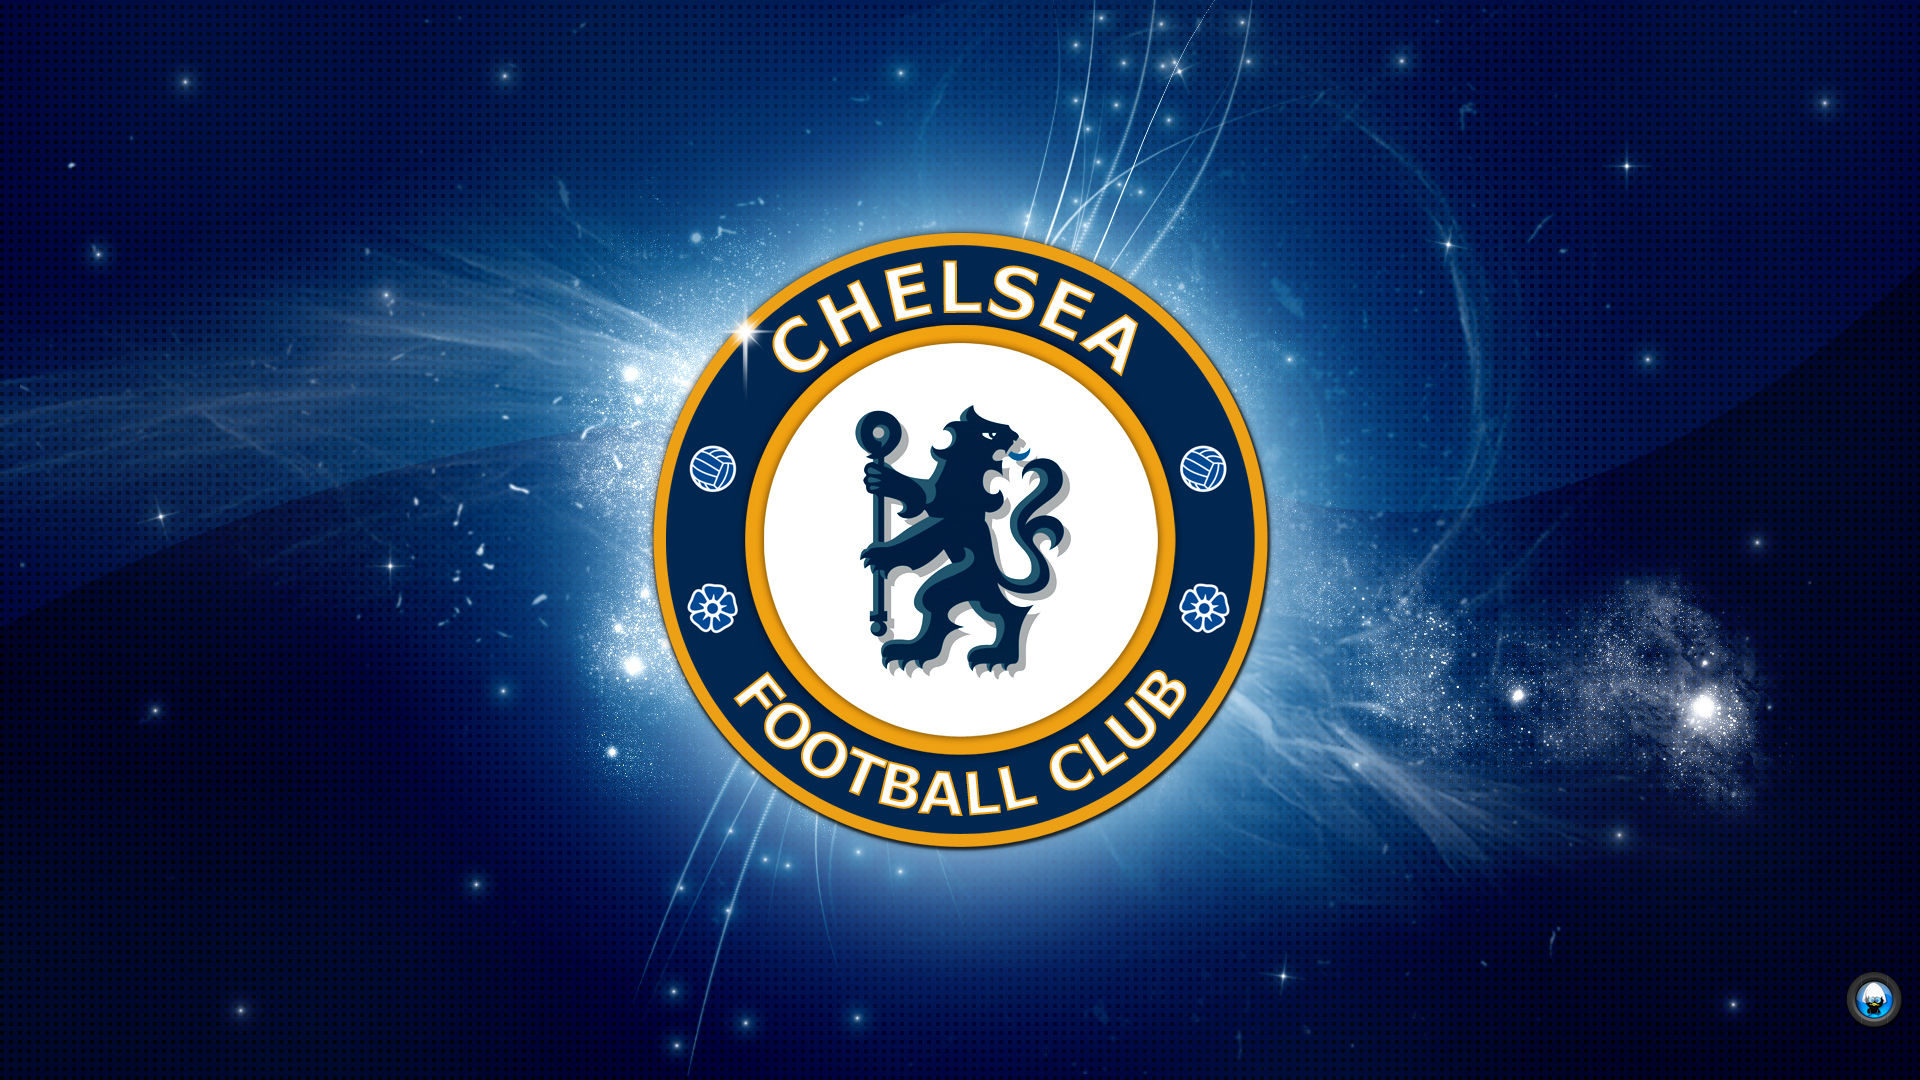 Chelsea FC From West London Best High Quality In HD Wallpaper Widescreen